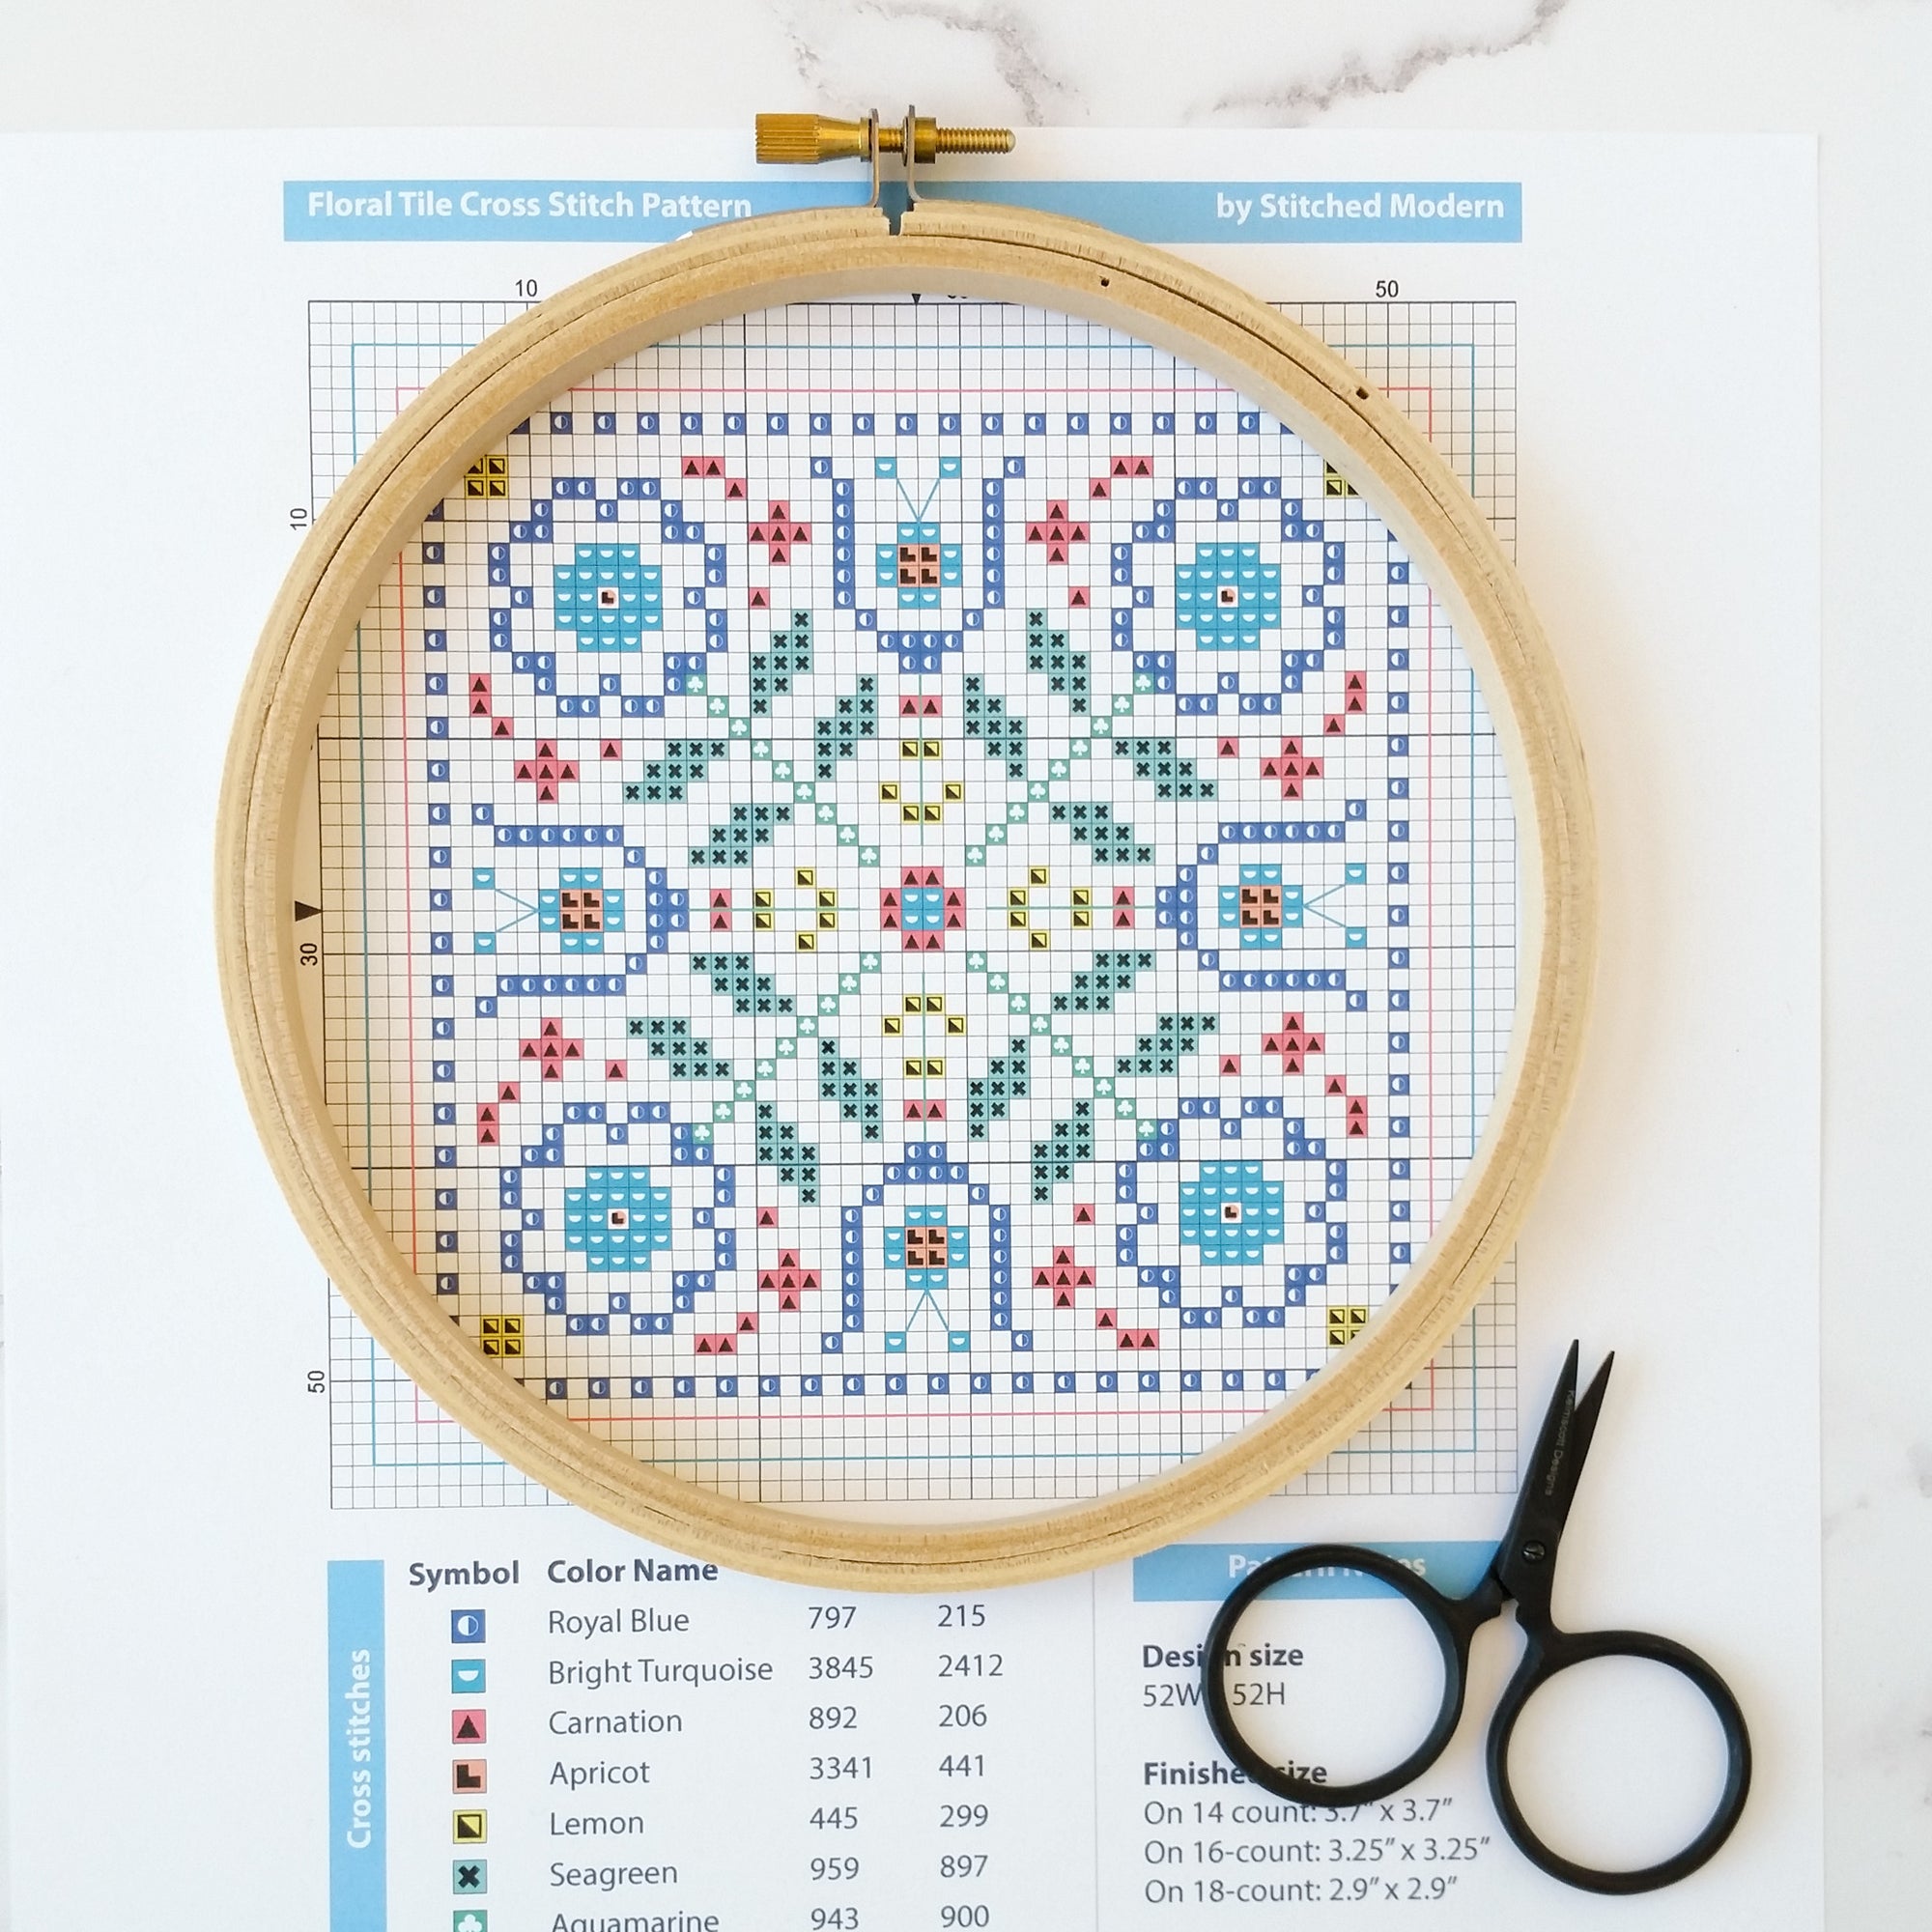 Sewing Patterns, Meaning & Symbols - Lesson